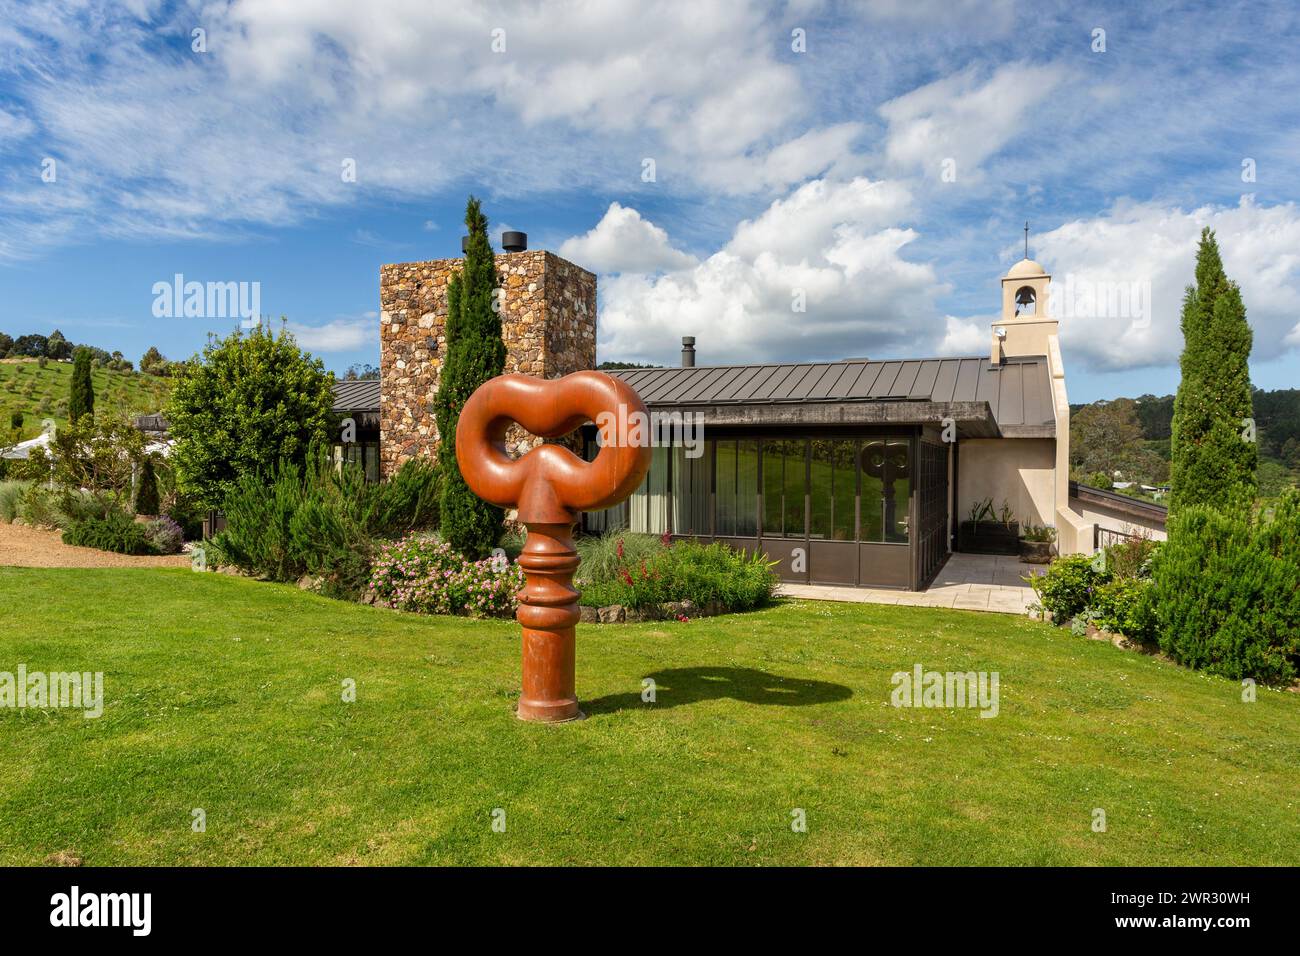 Giant corkscrew sculpture next to the Cheshire Architects 2016 transformation of Tantalus Estate Vineyard & Winery building in the Onetangi Valley, Wa Stock Photo